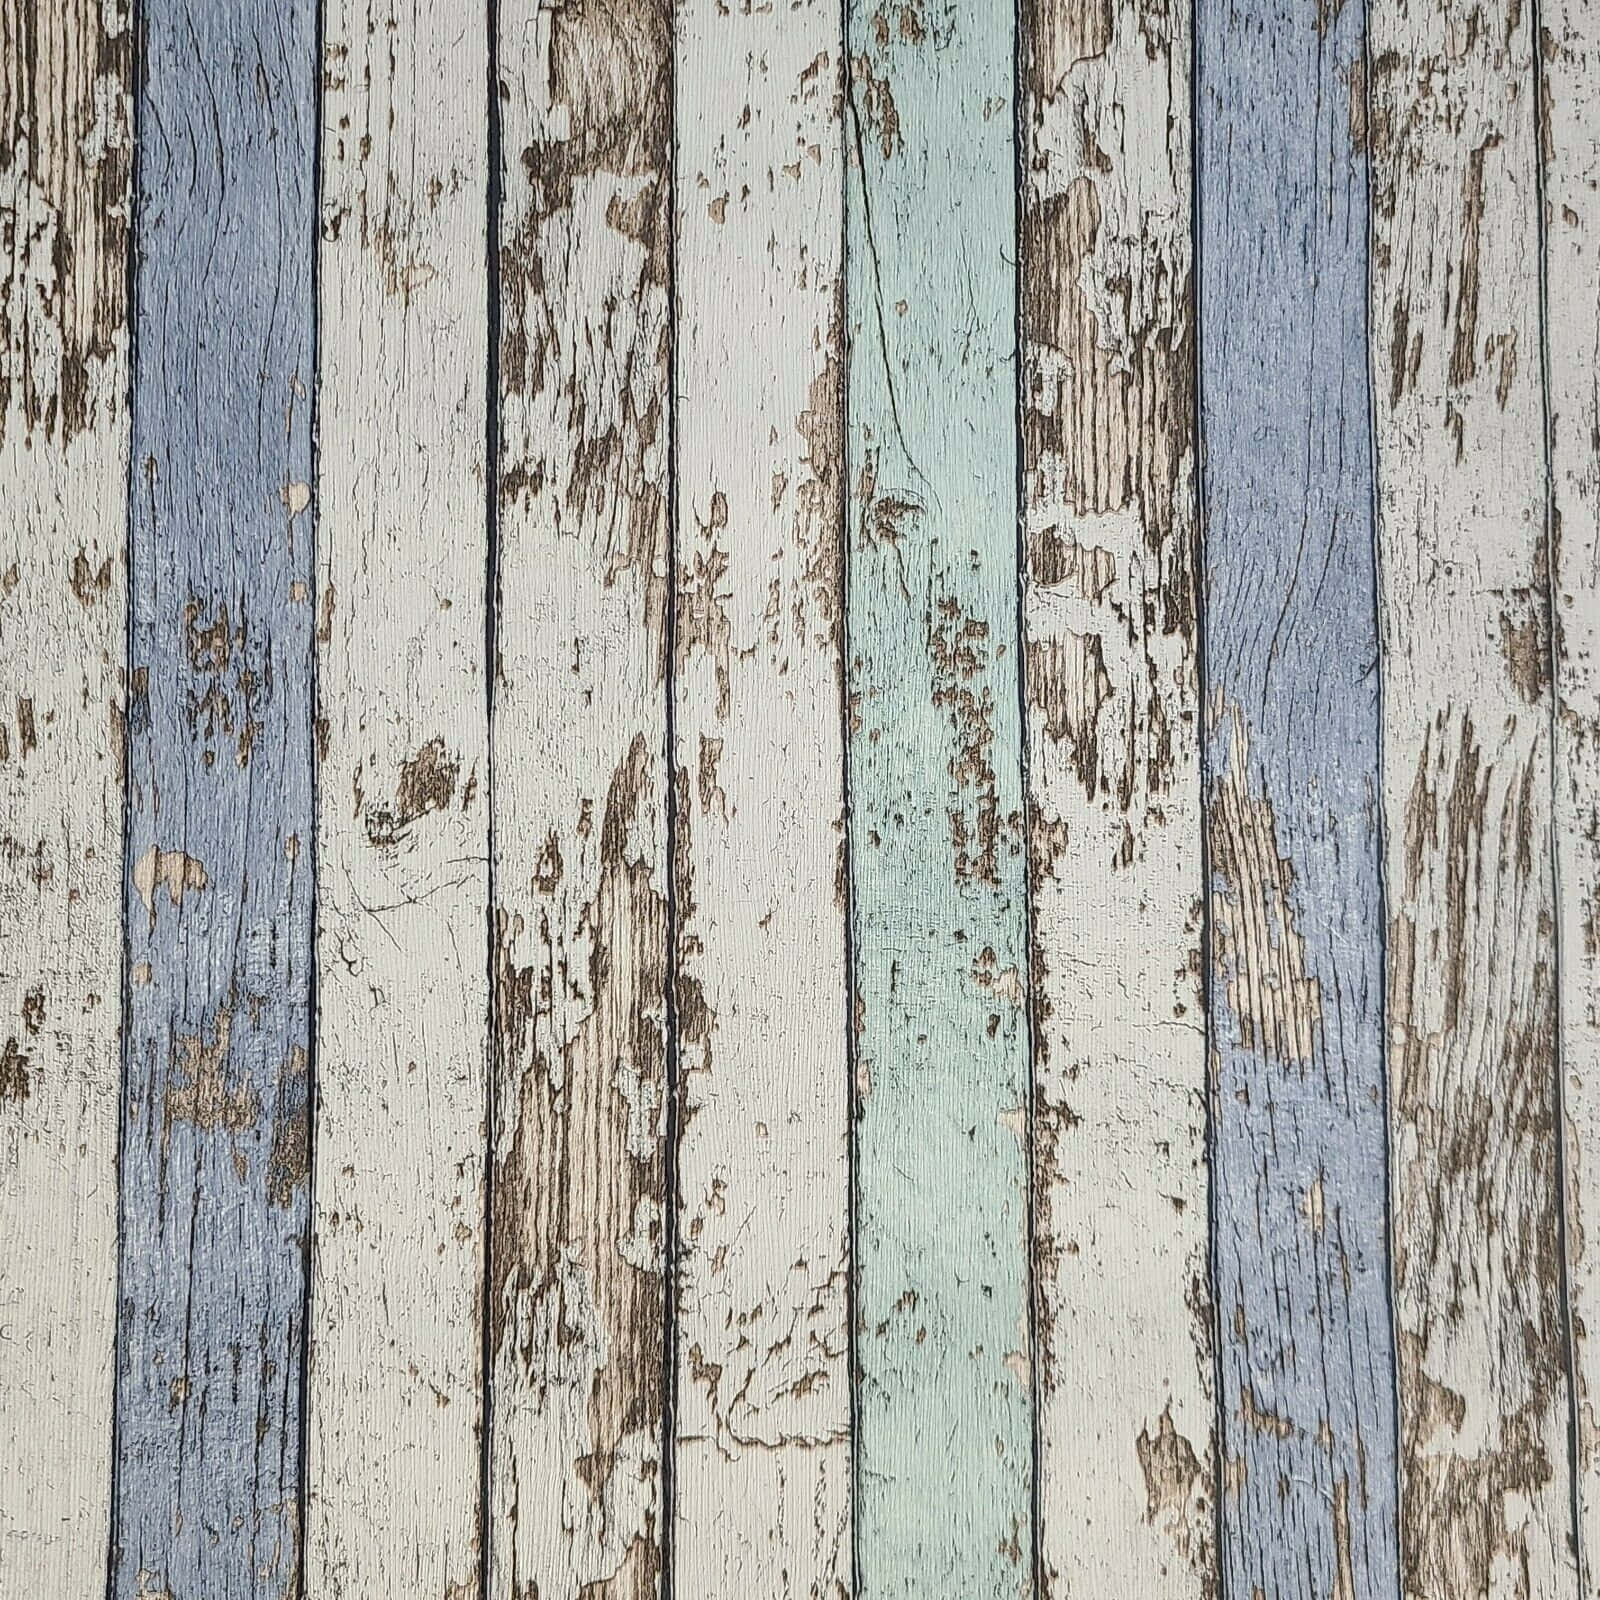 A Close Up Of A Wooden Plank With Blue And White Stripes